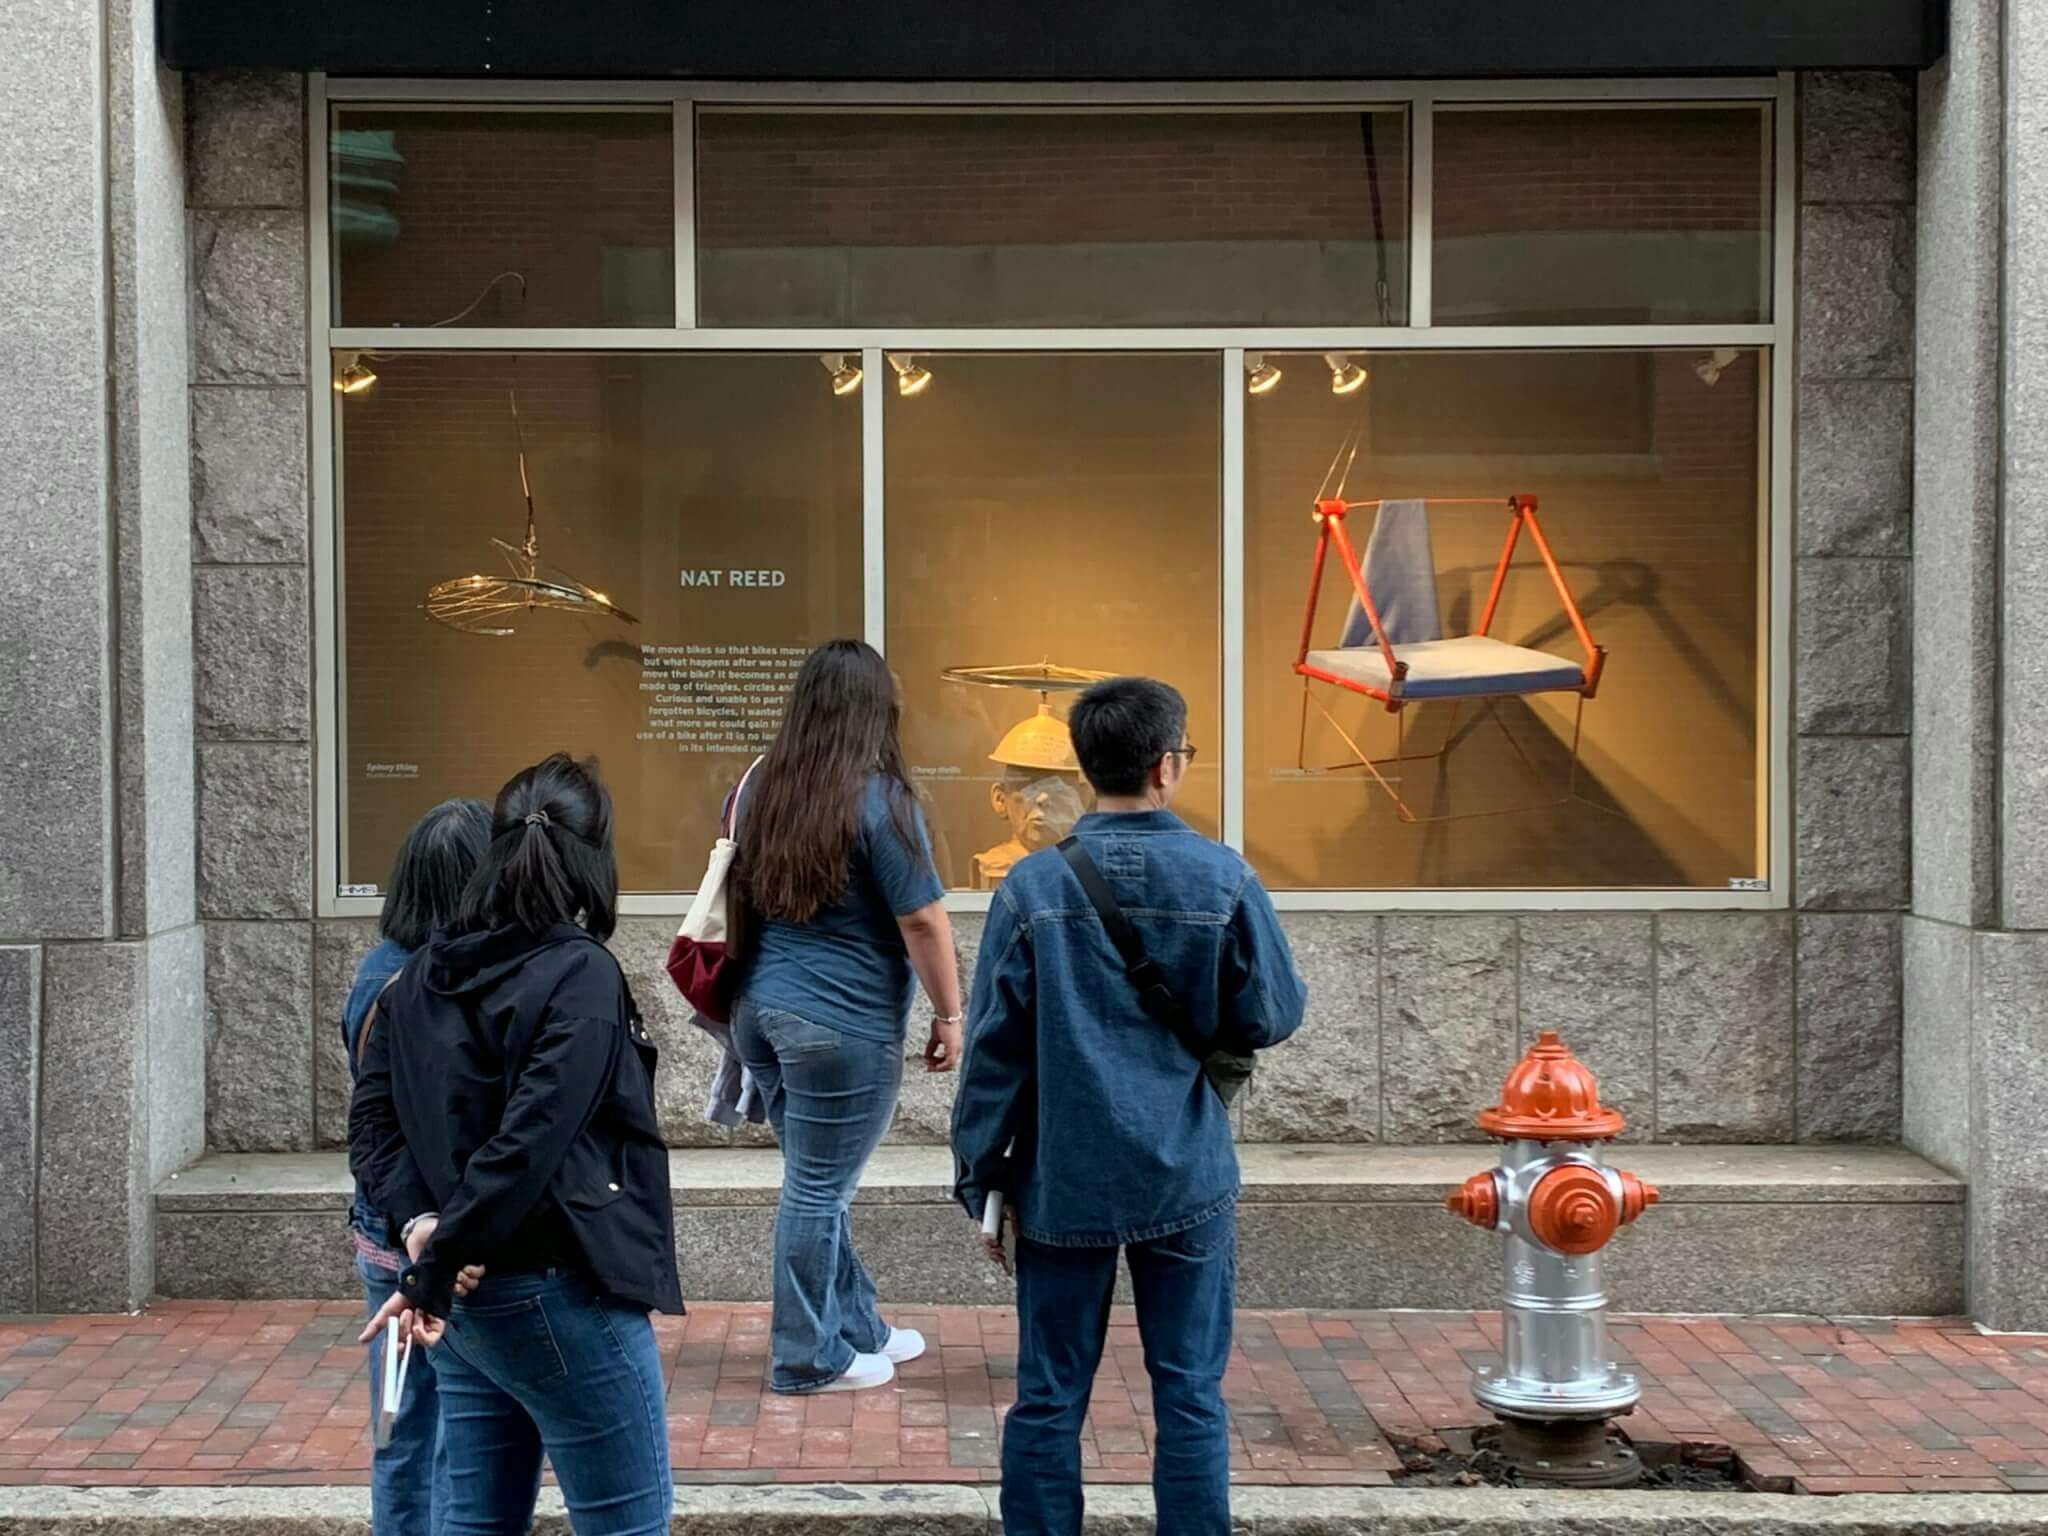 Image of passersby looking at "Bikes Move Us" installation